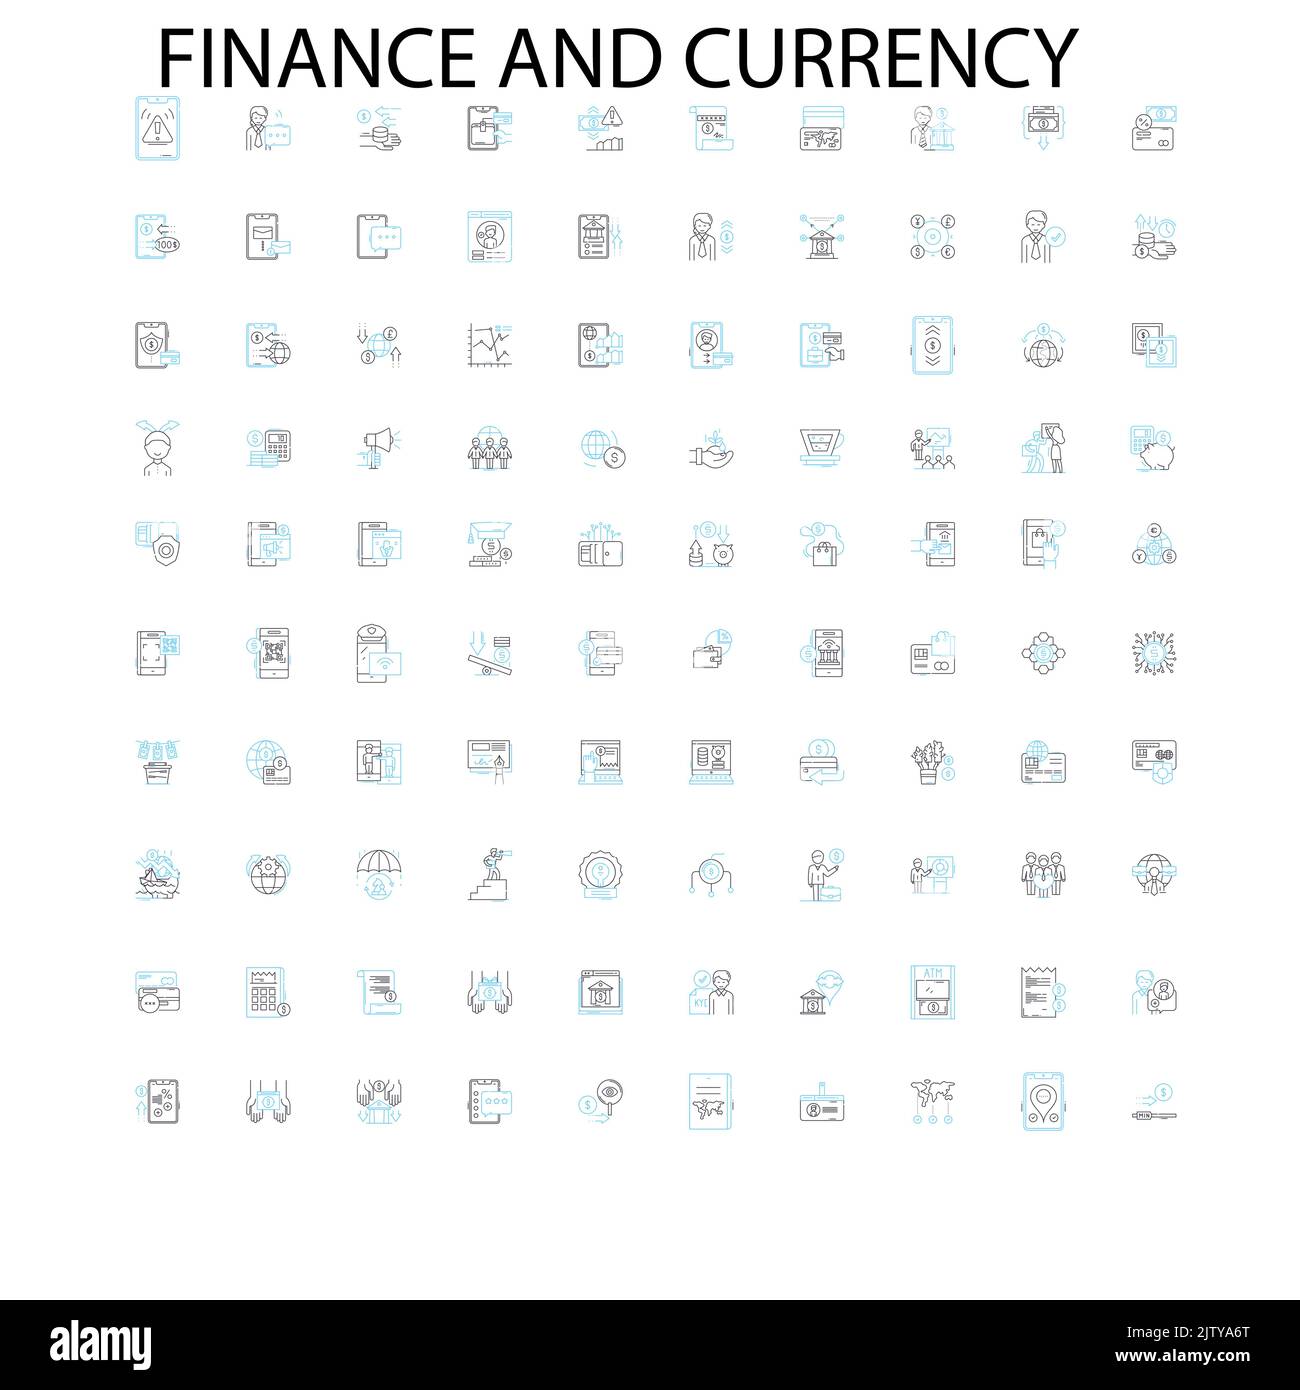 finance and currency icons, signs, outline symbols, concept linear illustration line collection Stock Vector